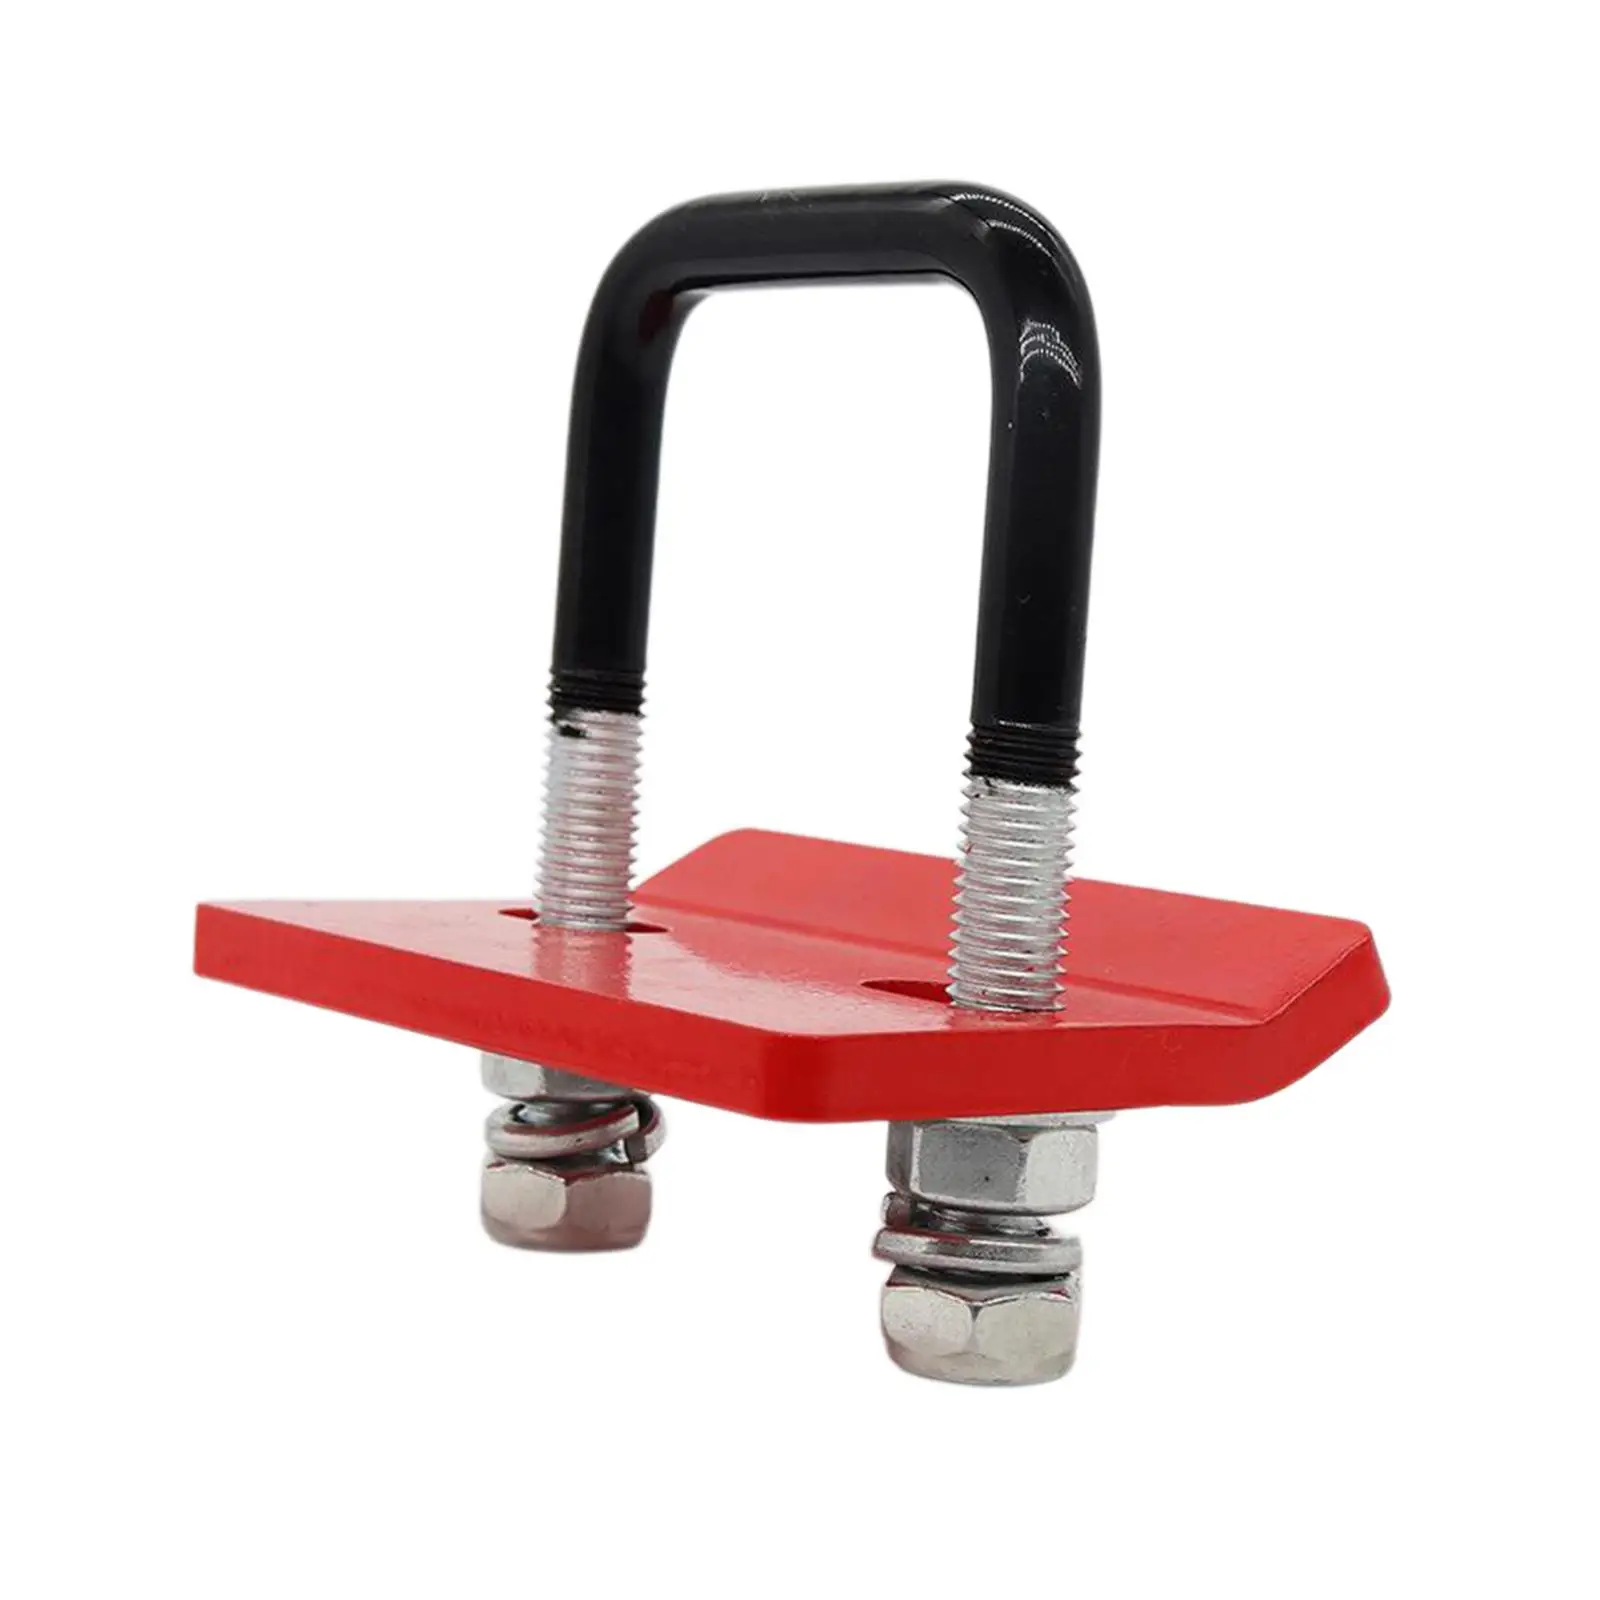 Alloy Steel Hitch Tightener Hitch Stabilizer for Trailer Ball Mount Boat